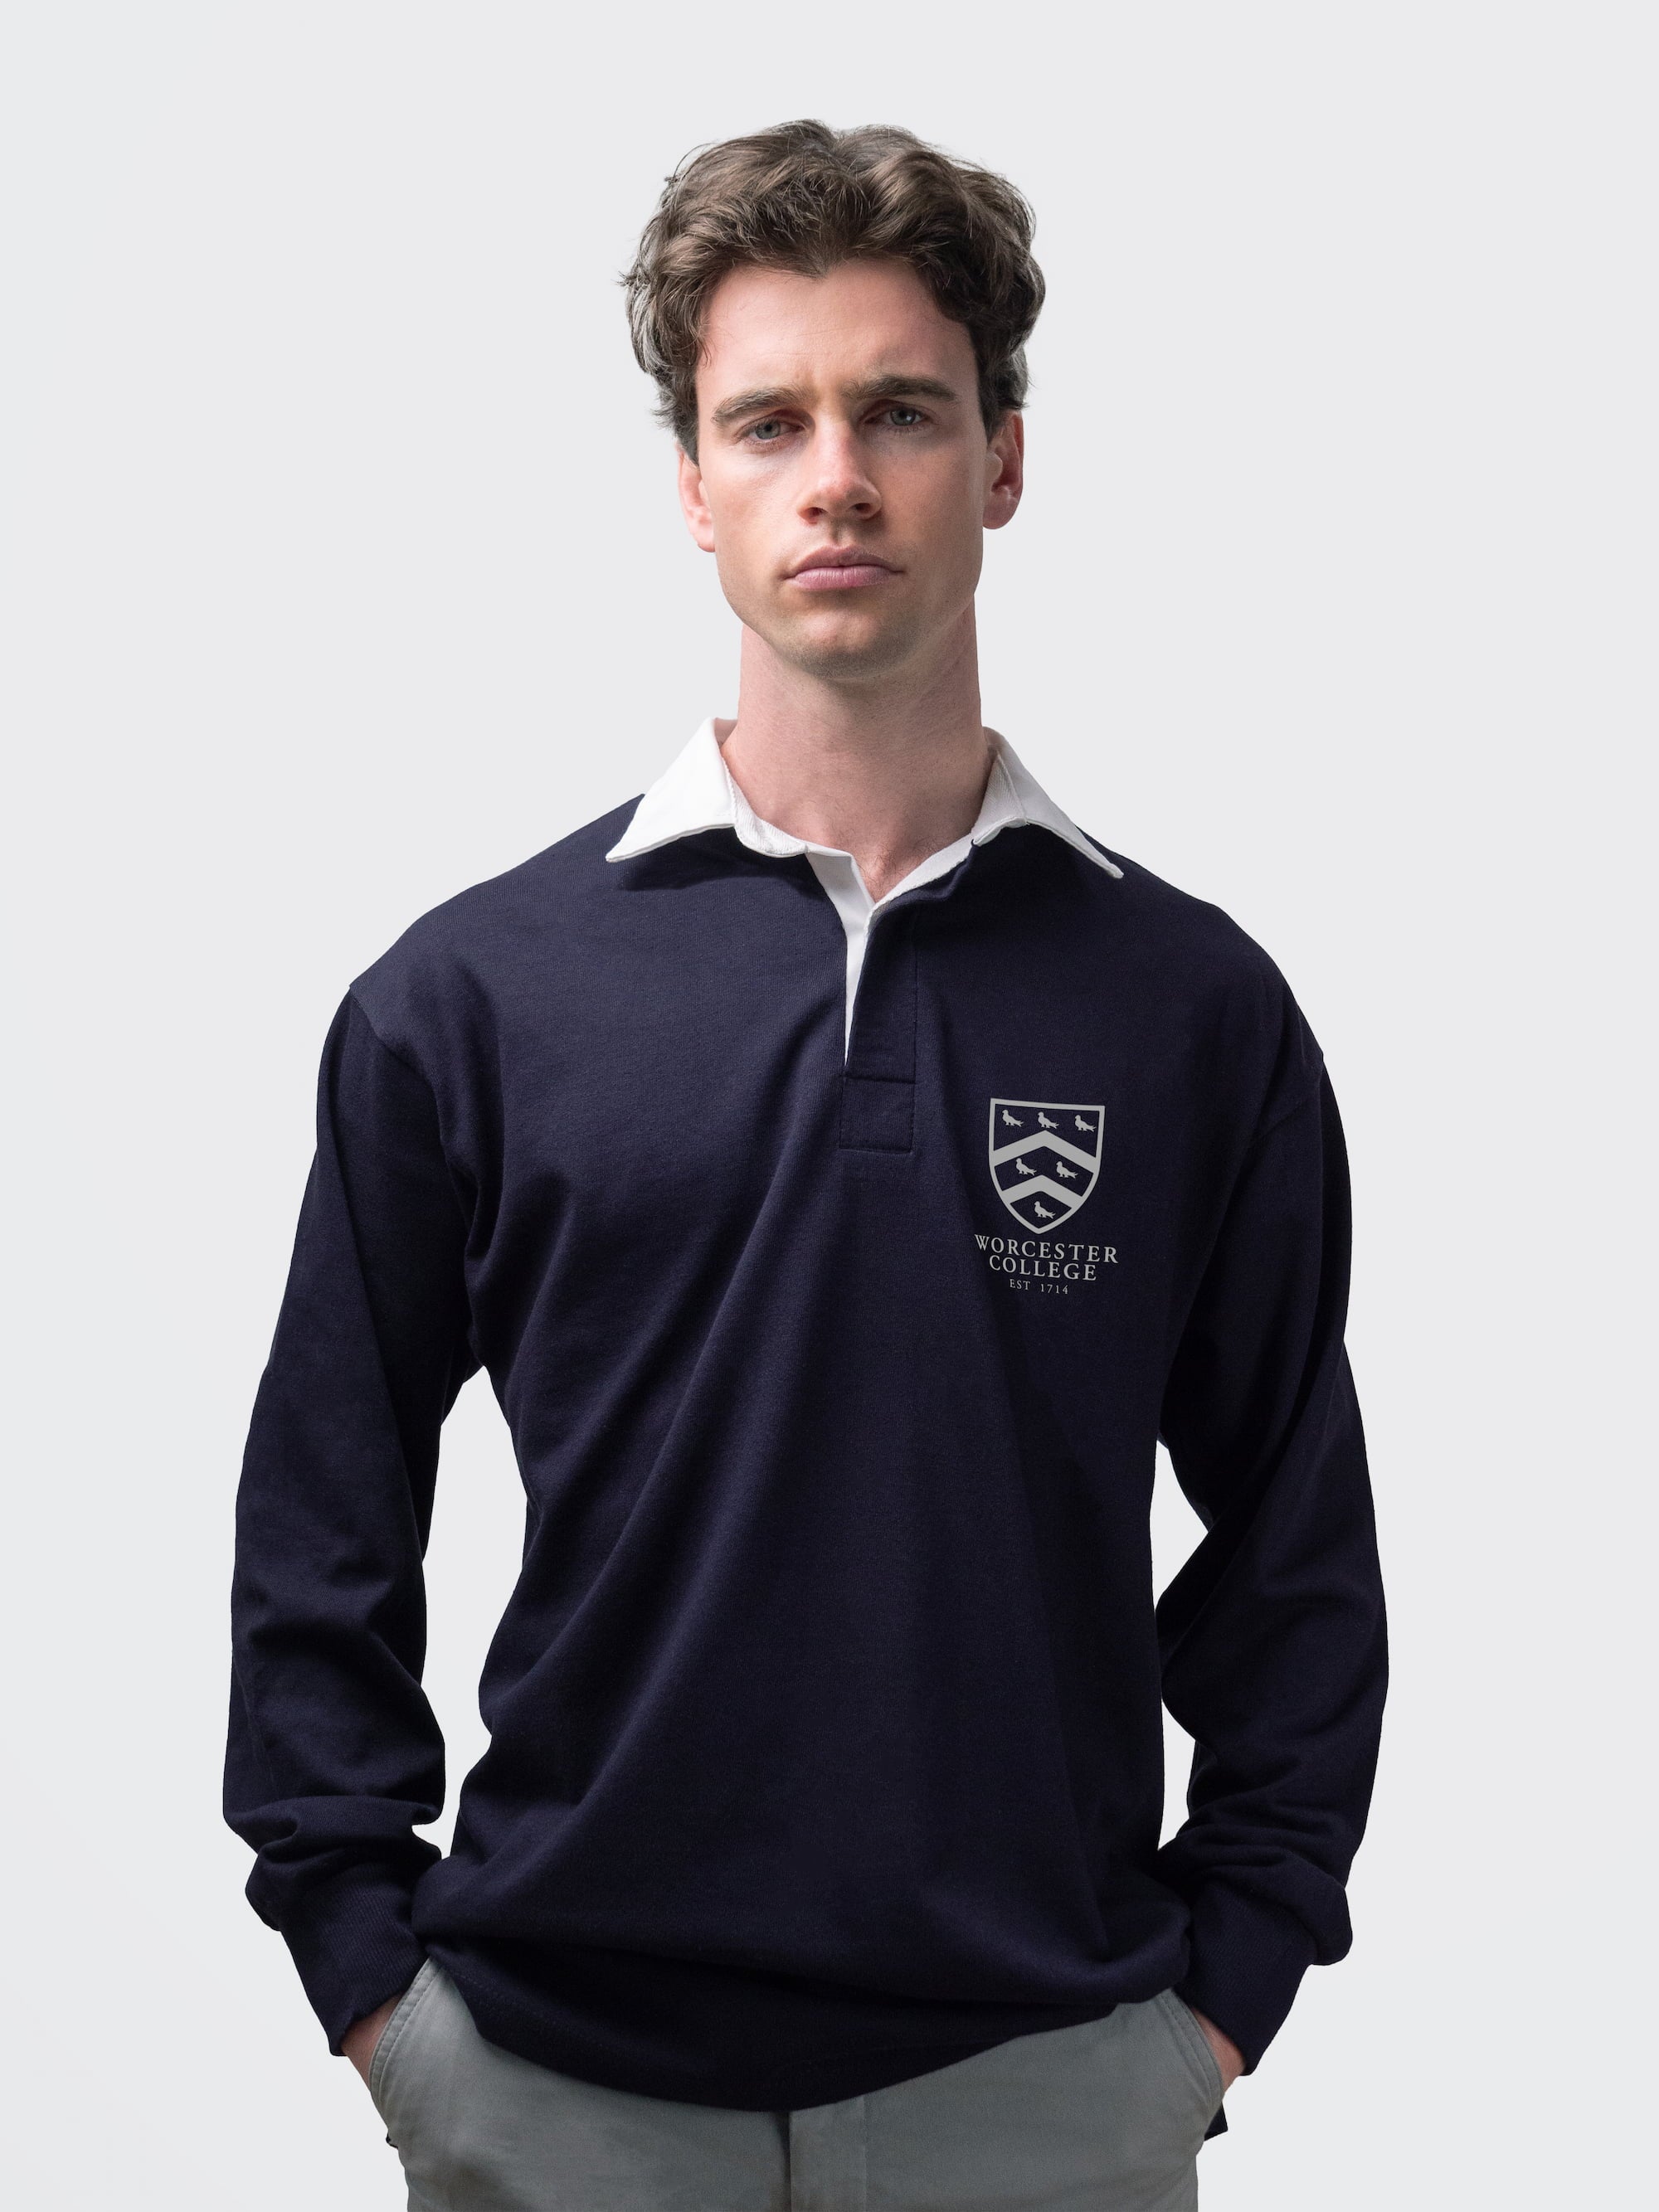 Worcester student wearing an embroidered mens rugby shirt in navy